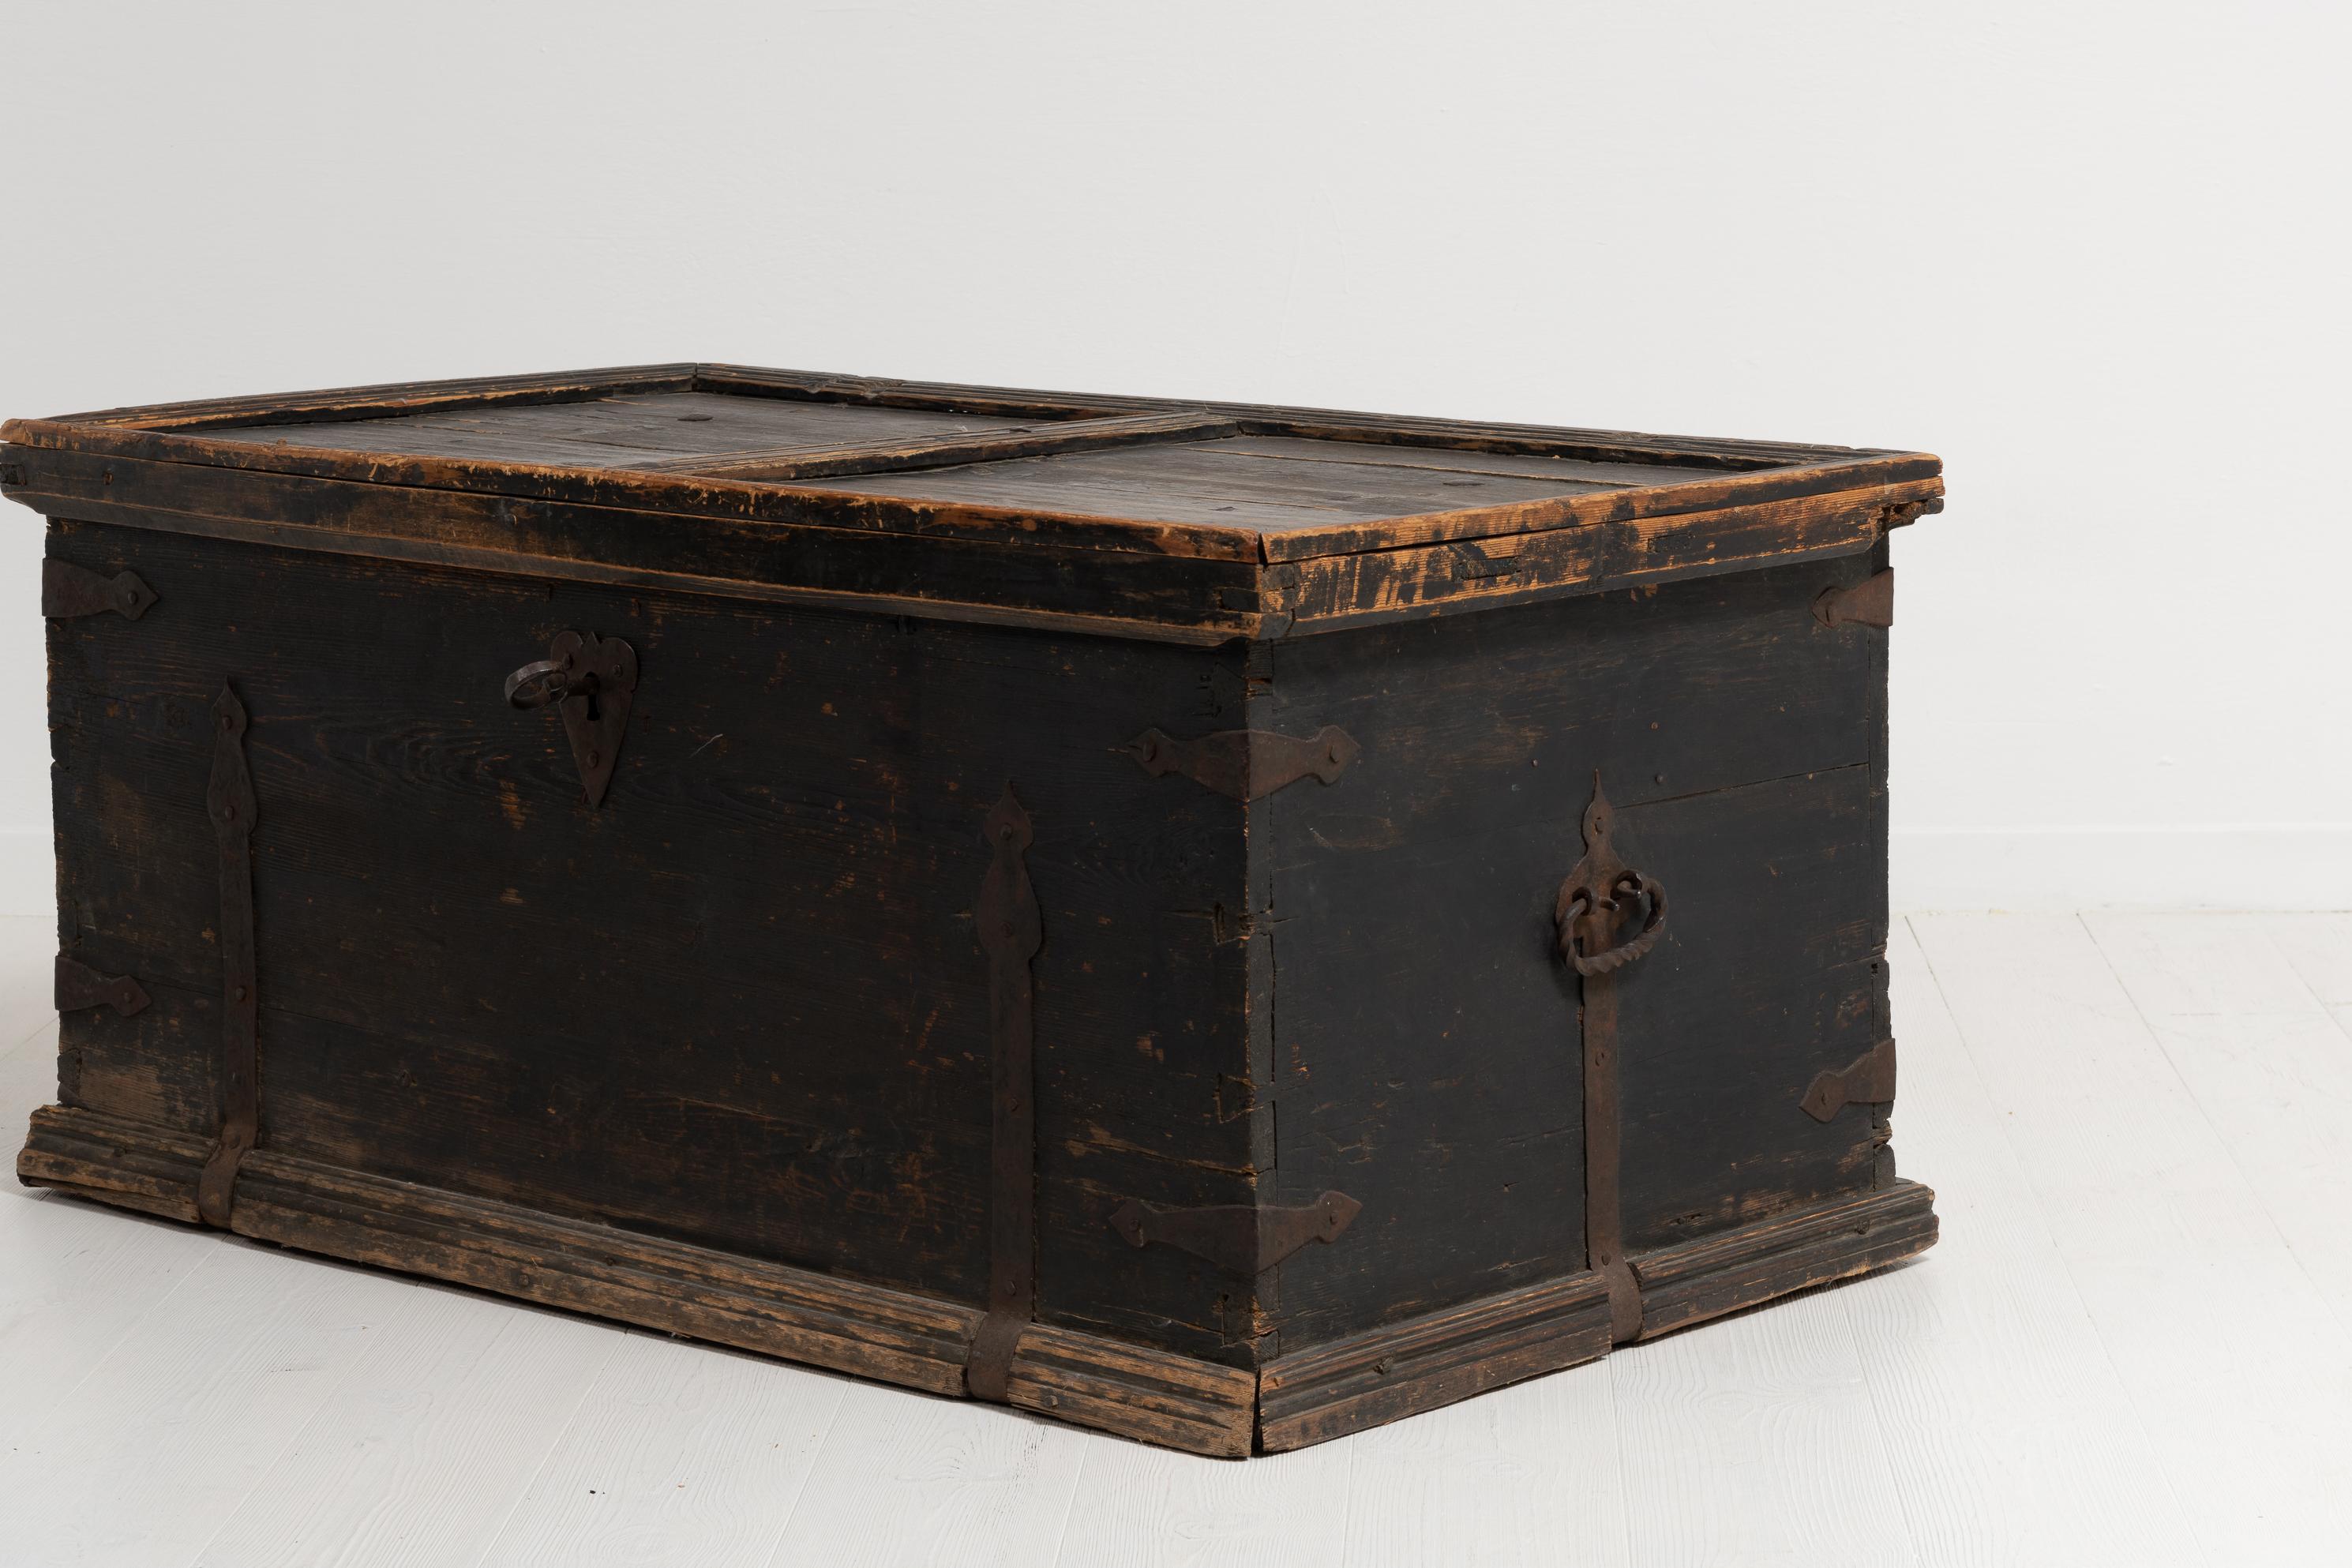 Hand-Crafted Early 19th Century Swedish Black Pine Soldier's Chest